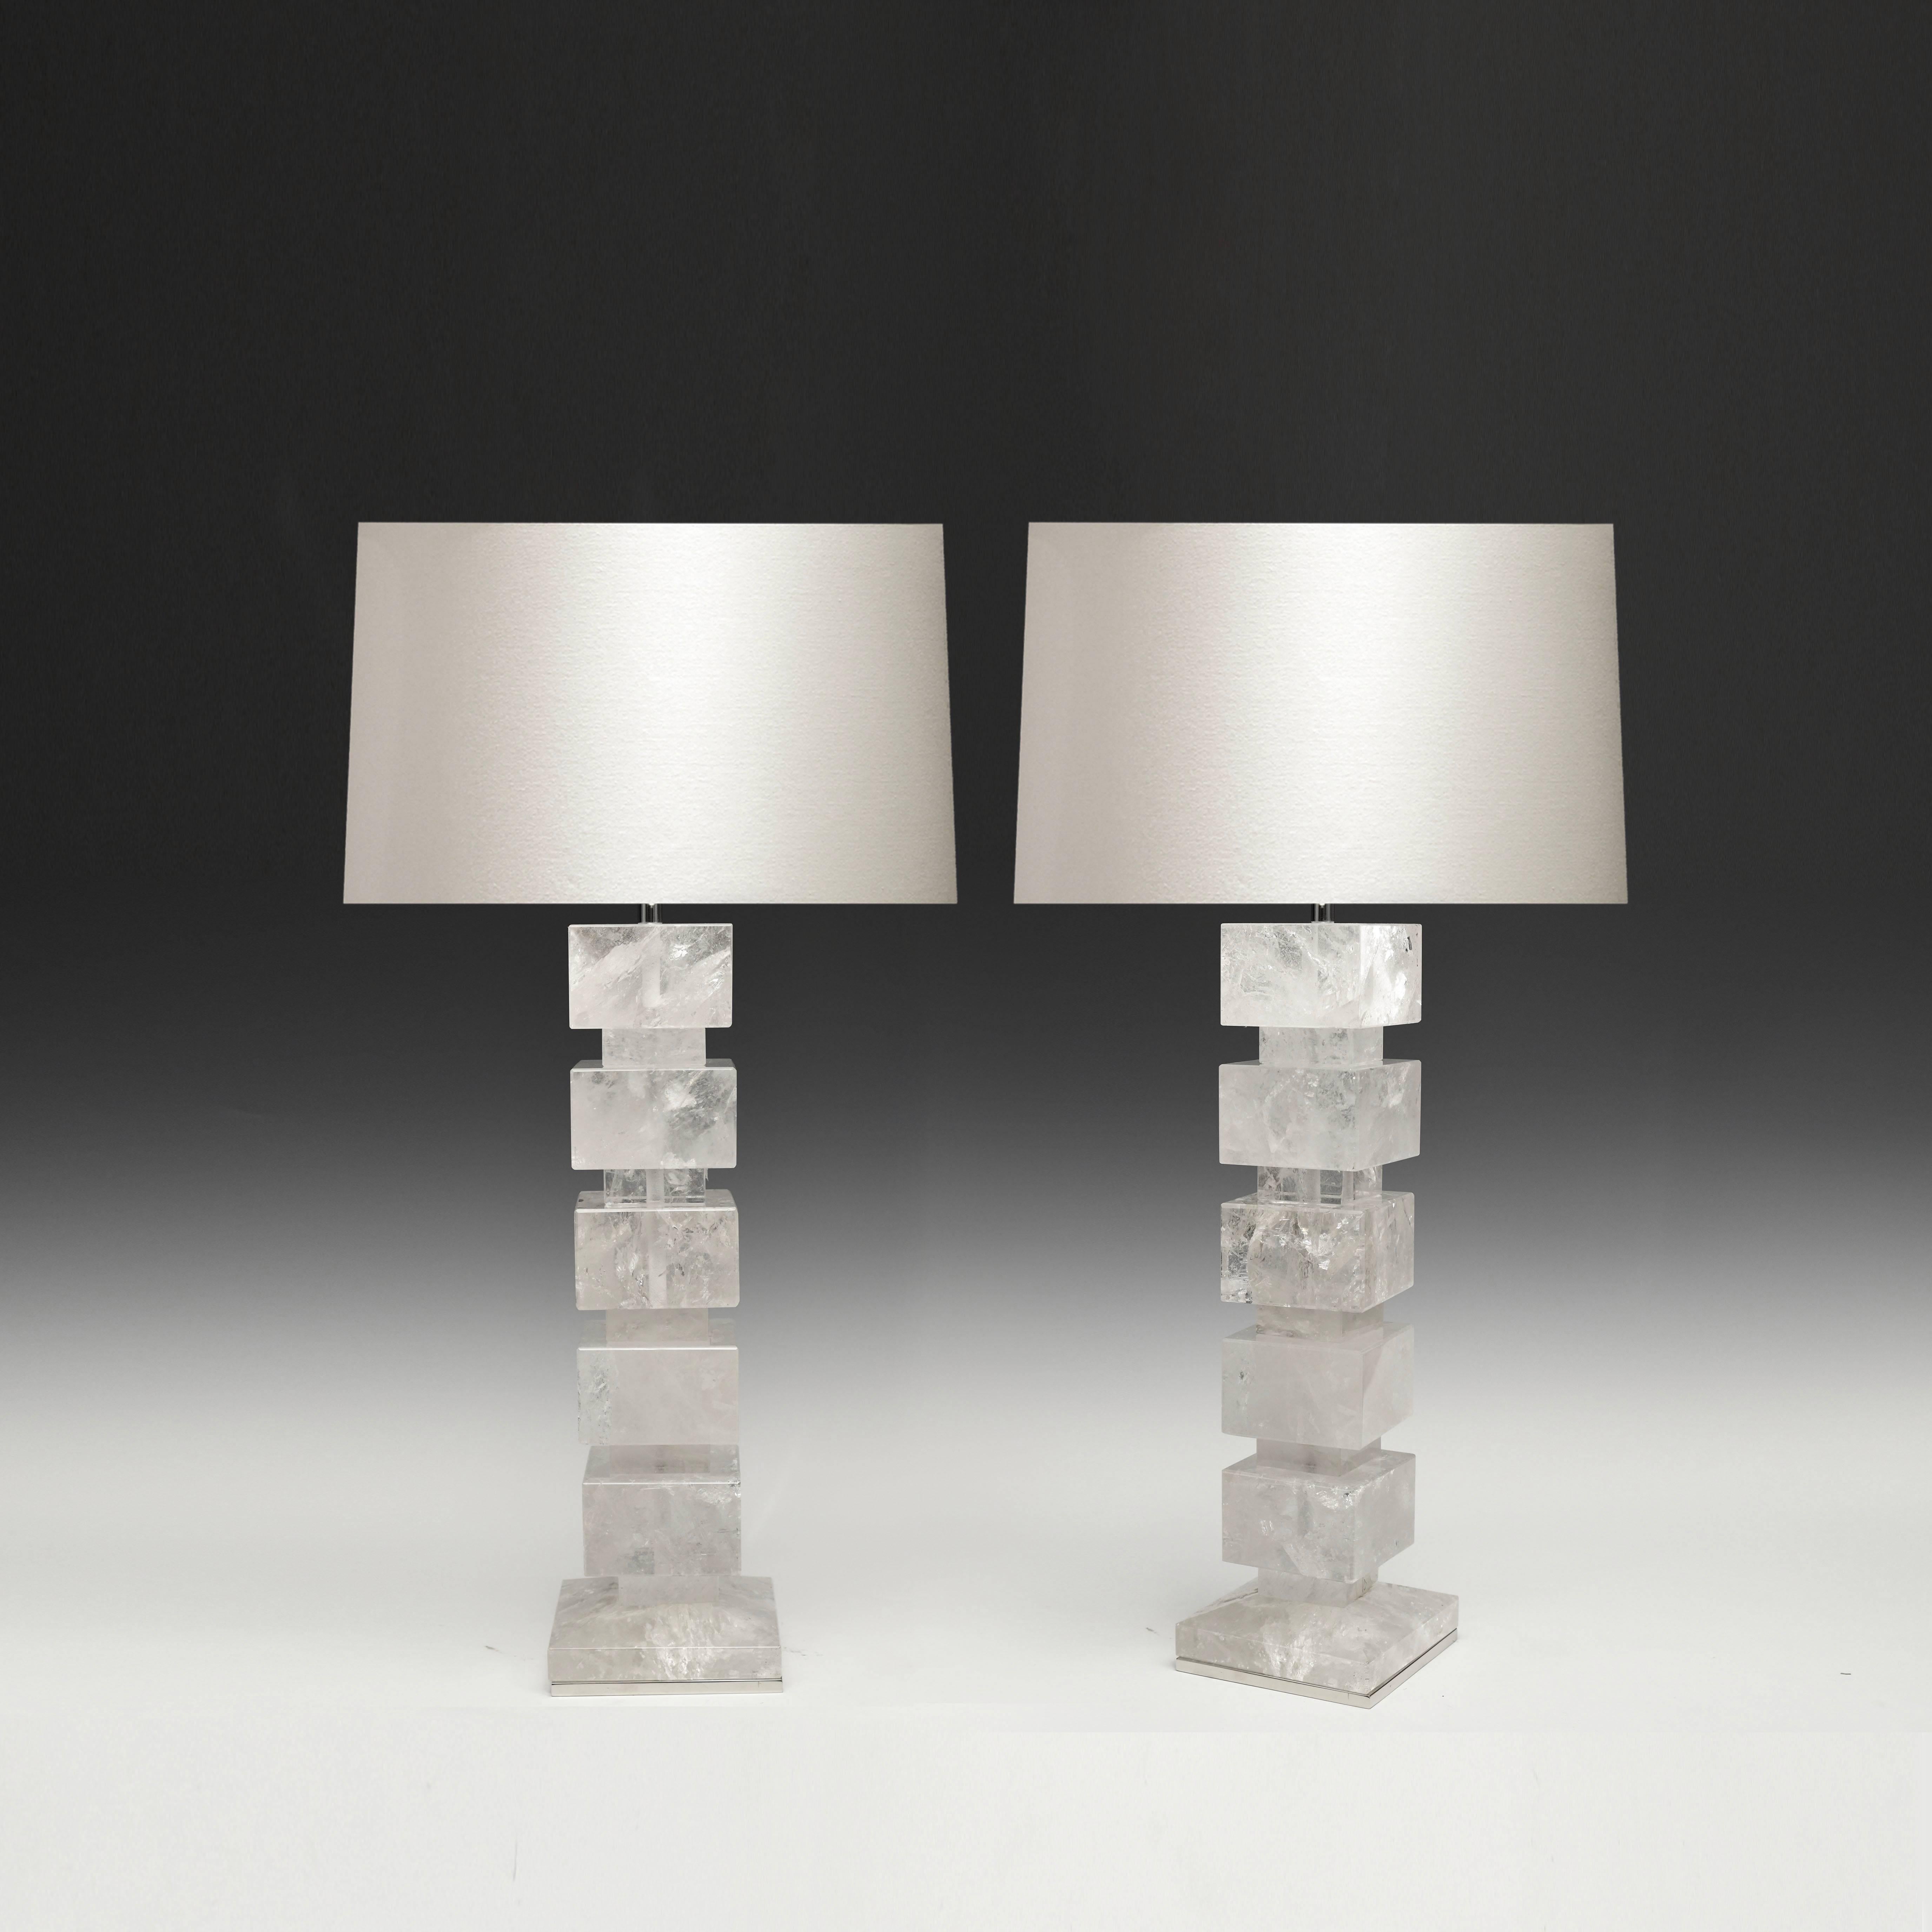 Larger pair of block form rock crystal lamps.
The height to the top of the rock crystal: 21